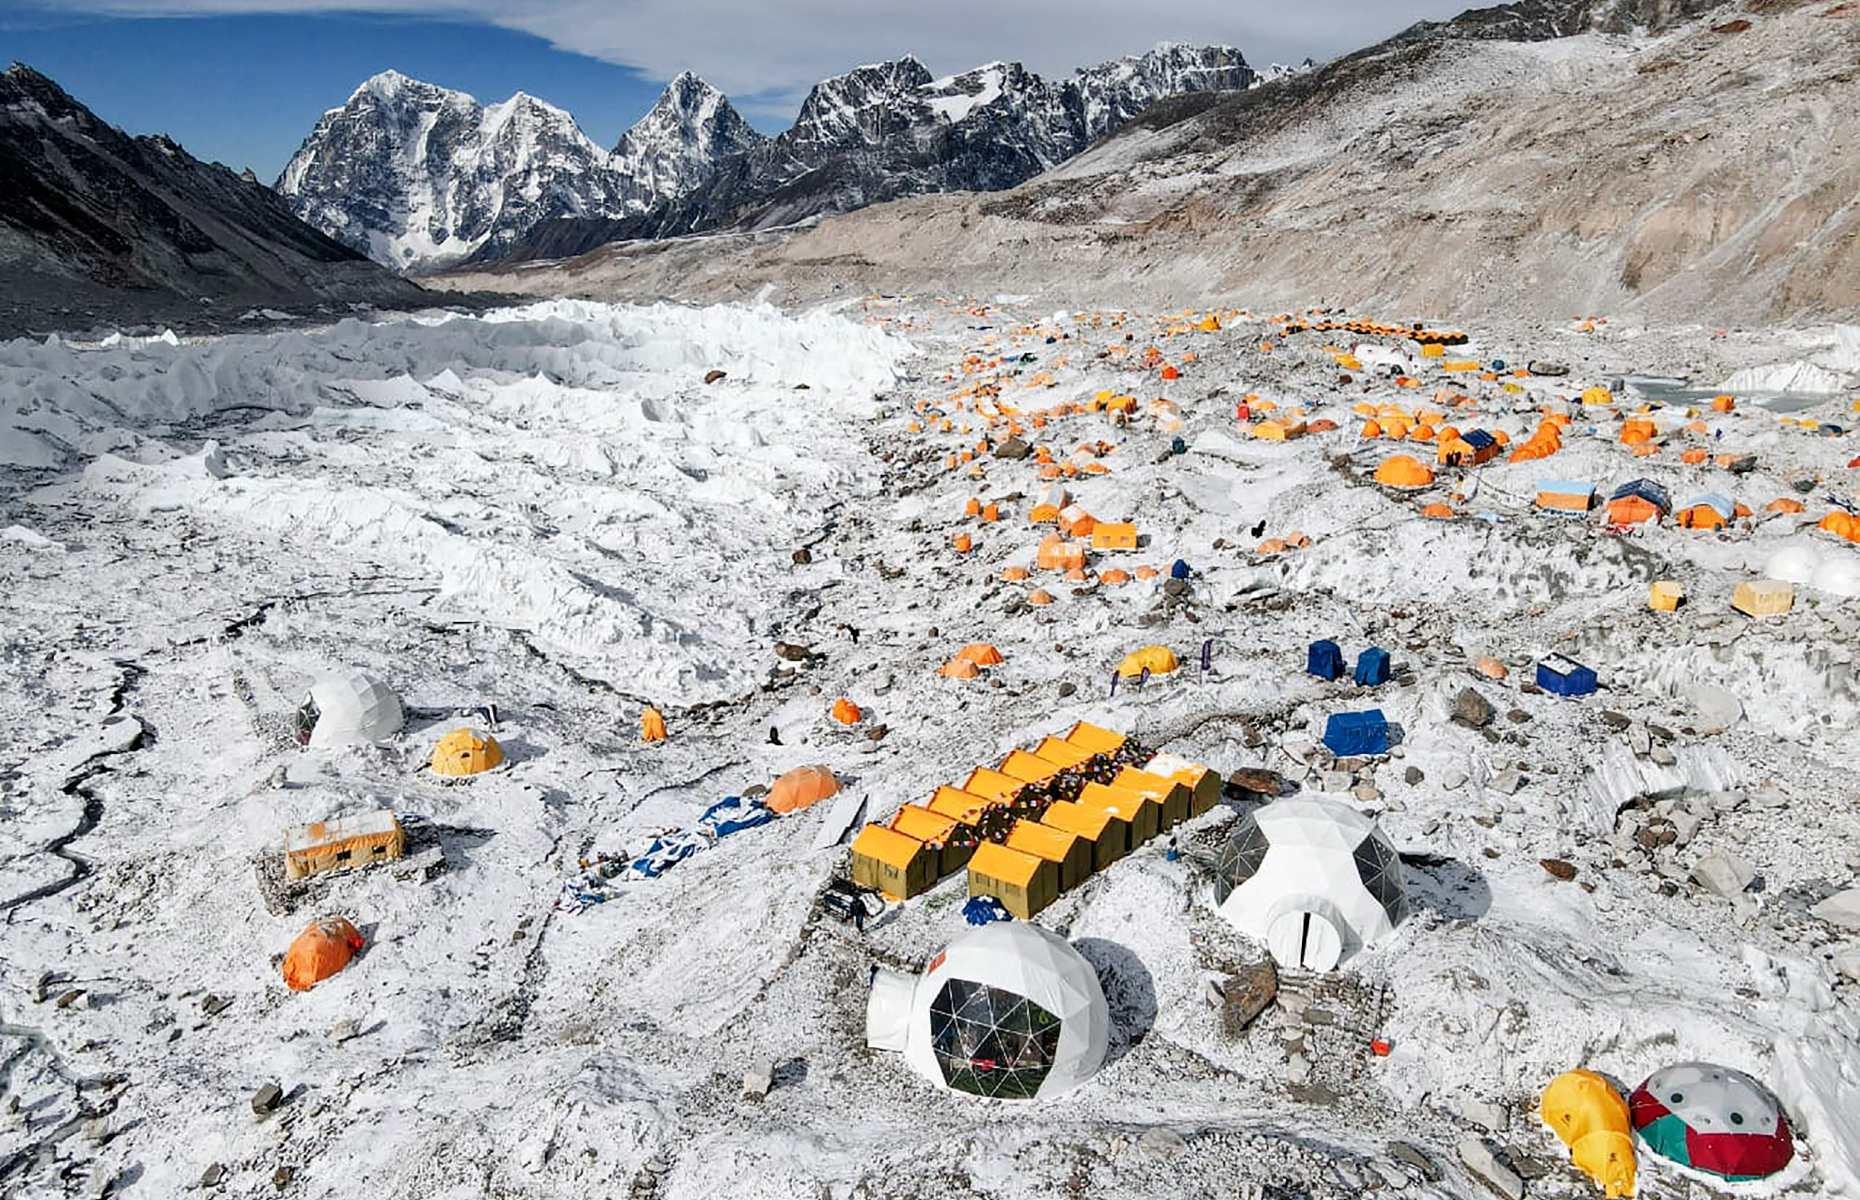 In June 2022, Nepal announced it would be moving Everest’s base camp to a lower-elevation location, as the current area is being destabilized by meltwater. The Khumbu glacier, on which the camp is located, is melting at a faster rate due to climate change, leading to crevasses opening up which are making the terrain unstable and unsafe. The landmark move will see the camp transferred from an elevation of 17,598 feet (5,364m) to an altitude around 656 feet to 1,312 feet (200-400m) lower, accordin